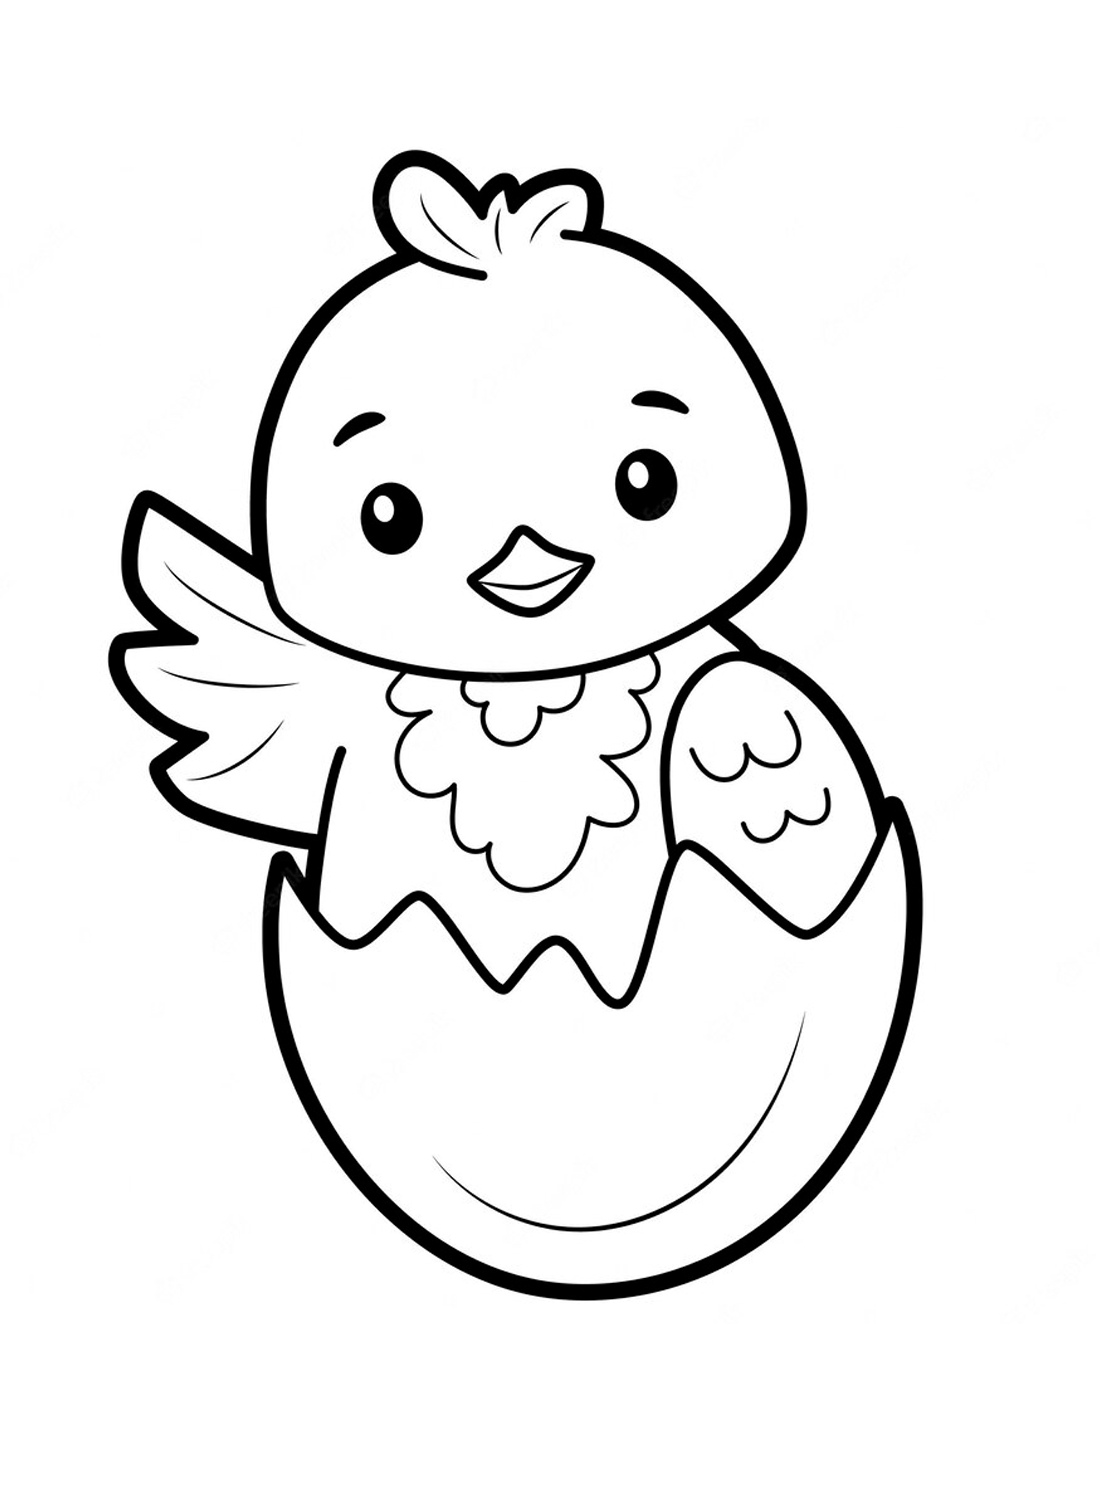 A small chick in a egg Coloring Pages